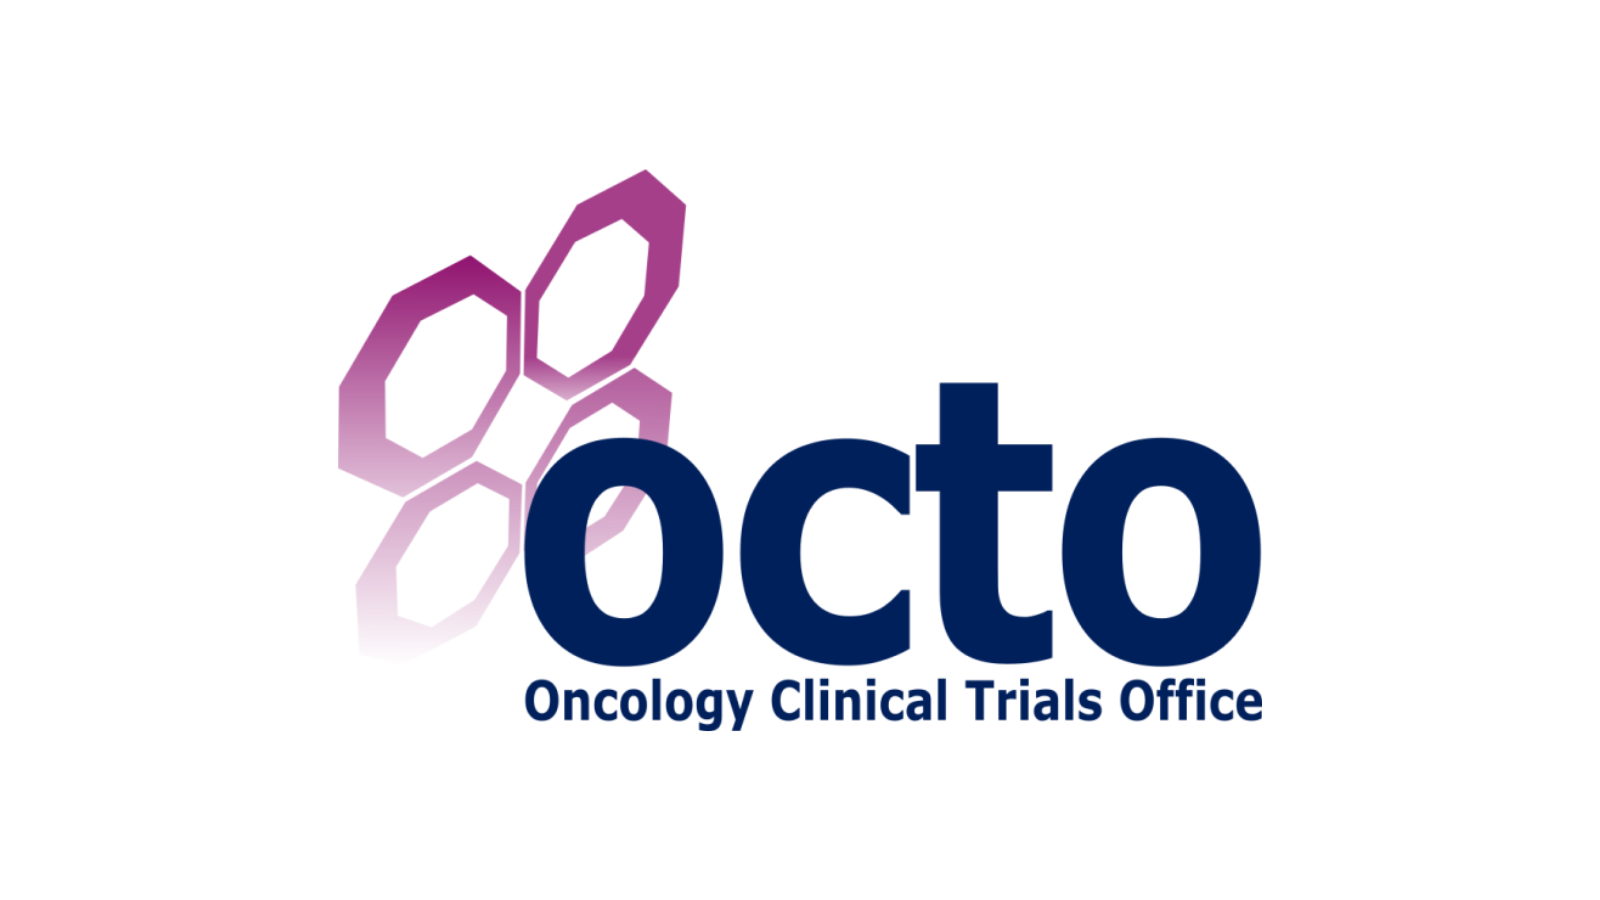 OCTO (Oxford Oncology Clinical Trial Office) logo.